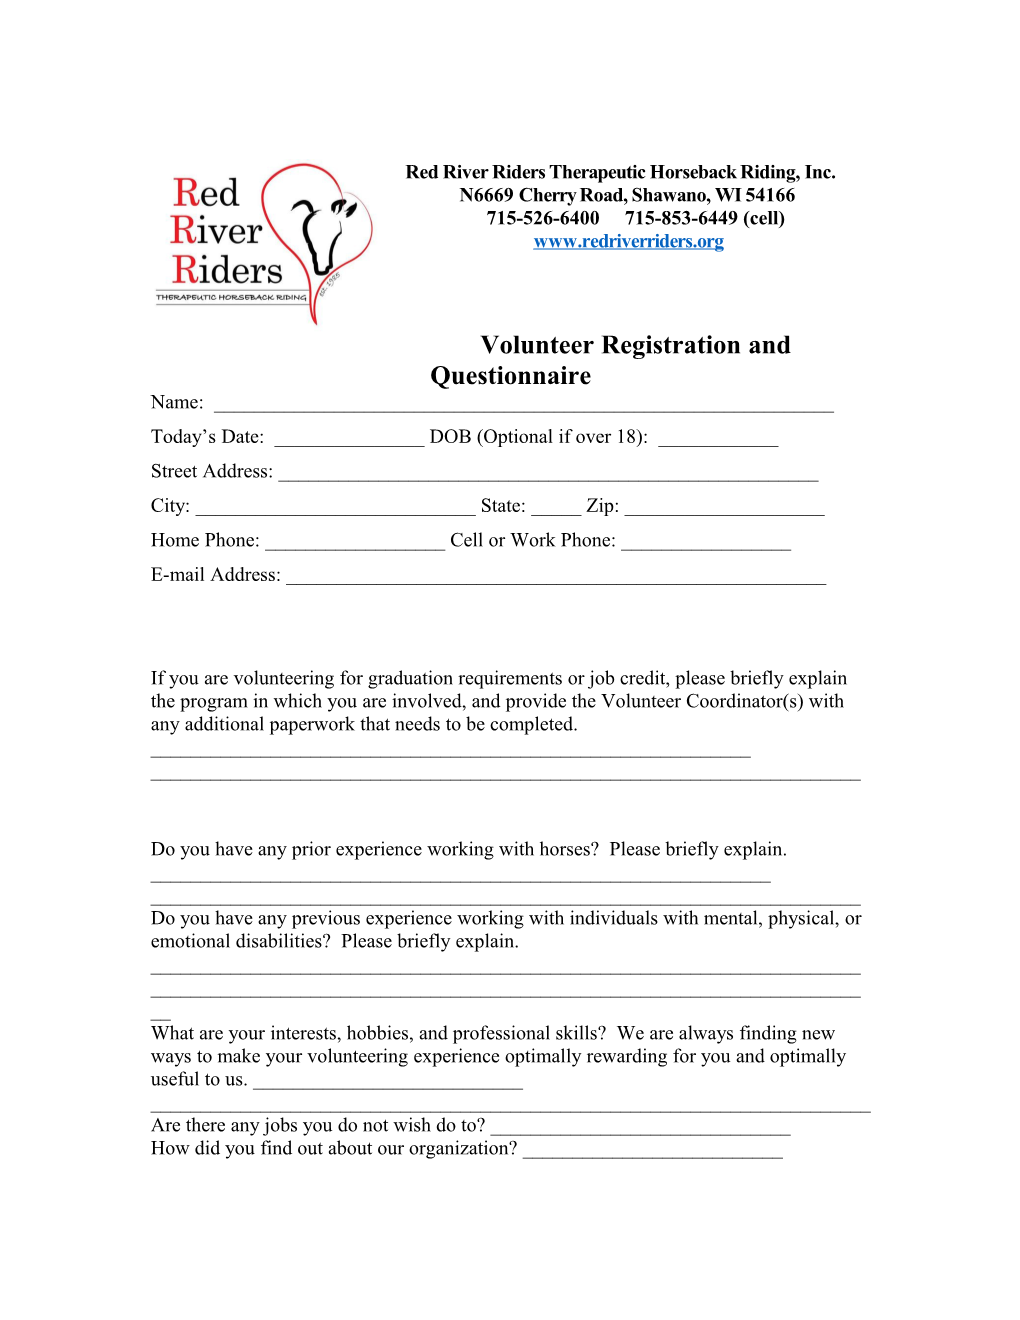 Volunteer Registration and Questionnaire